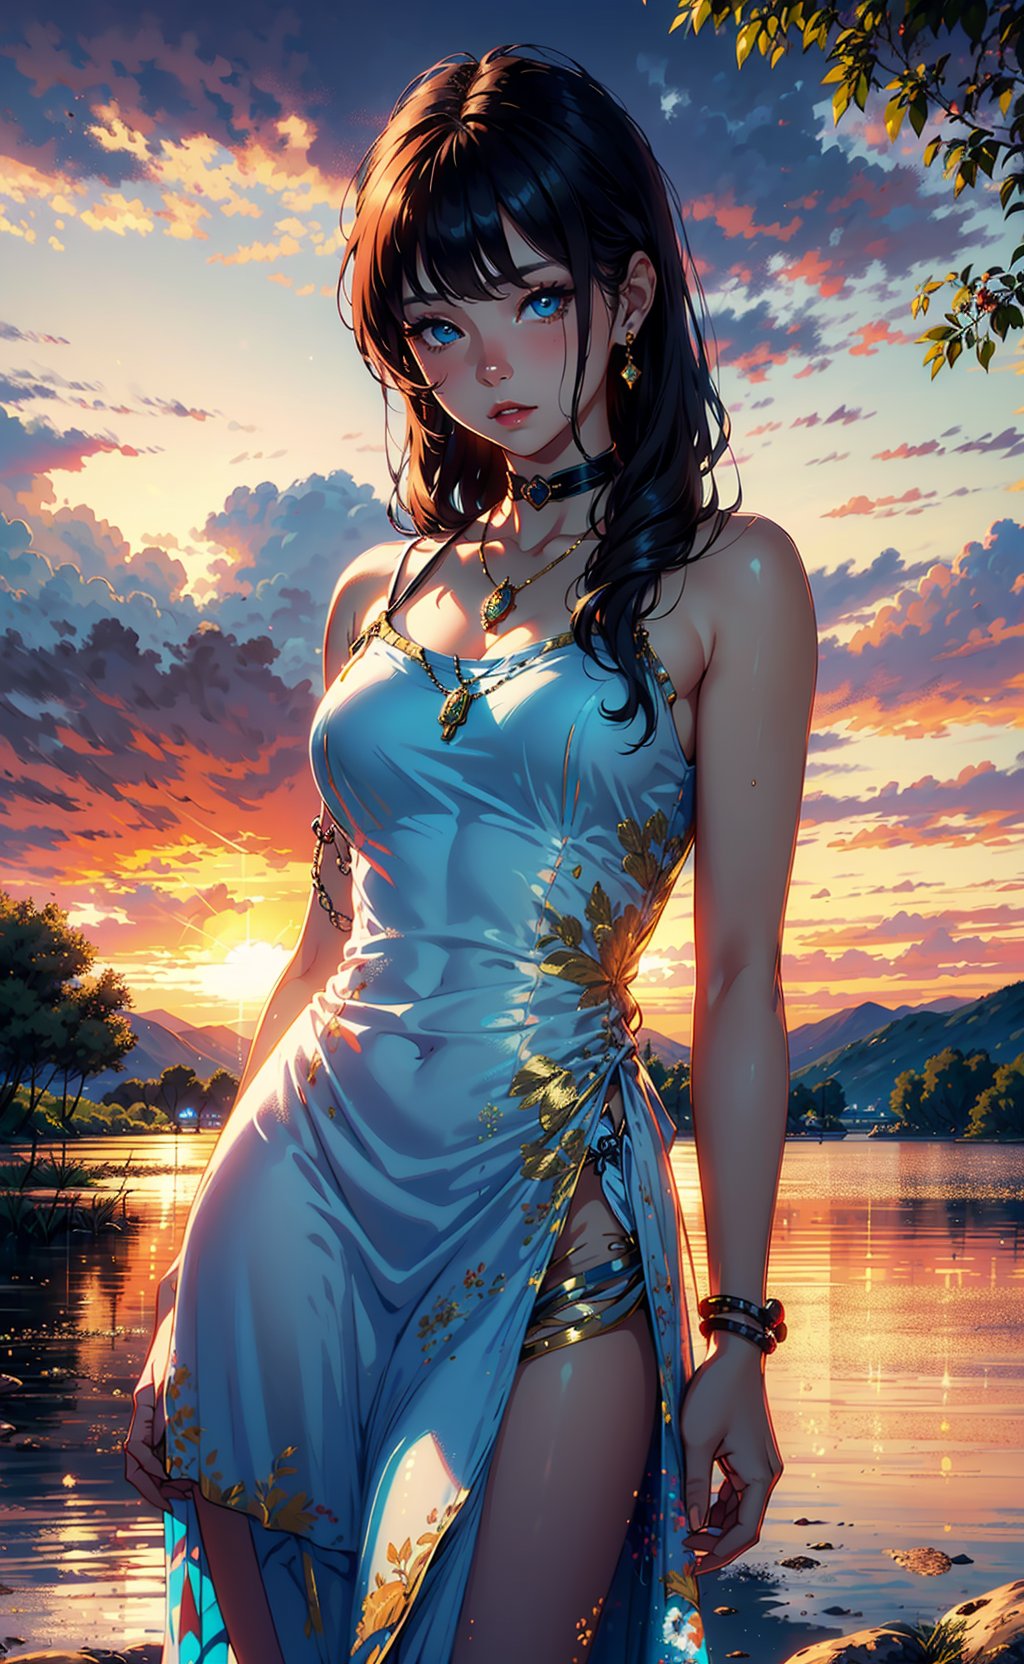 1 girl, serene expression, mesmerizing eyes, straight long hair, flowing dress, poised posture, porcelain skin, subtle blush, crystal pendantBREAKgolden hour, (rim lighting):1.2, warm tones, sun flare, soft shadows, vibrant colors, painterly effect, dreamy atmosphereBREAKscenic lake, distant mountains, willow tree, calm water, reflection, sunlit clouds, peaceful ambiance, idyllic sunset, ultra detailed, official art, unity 8k wallpaper, zentangle, mandala